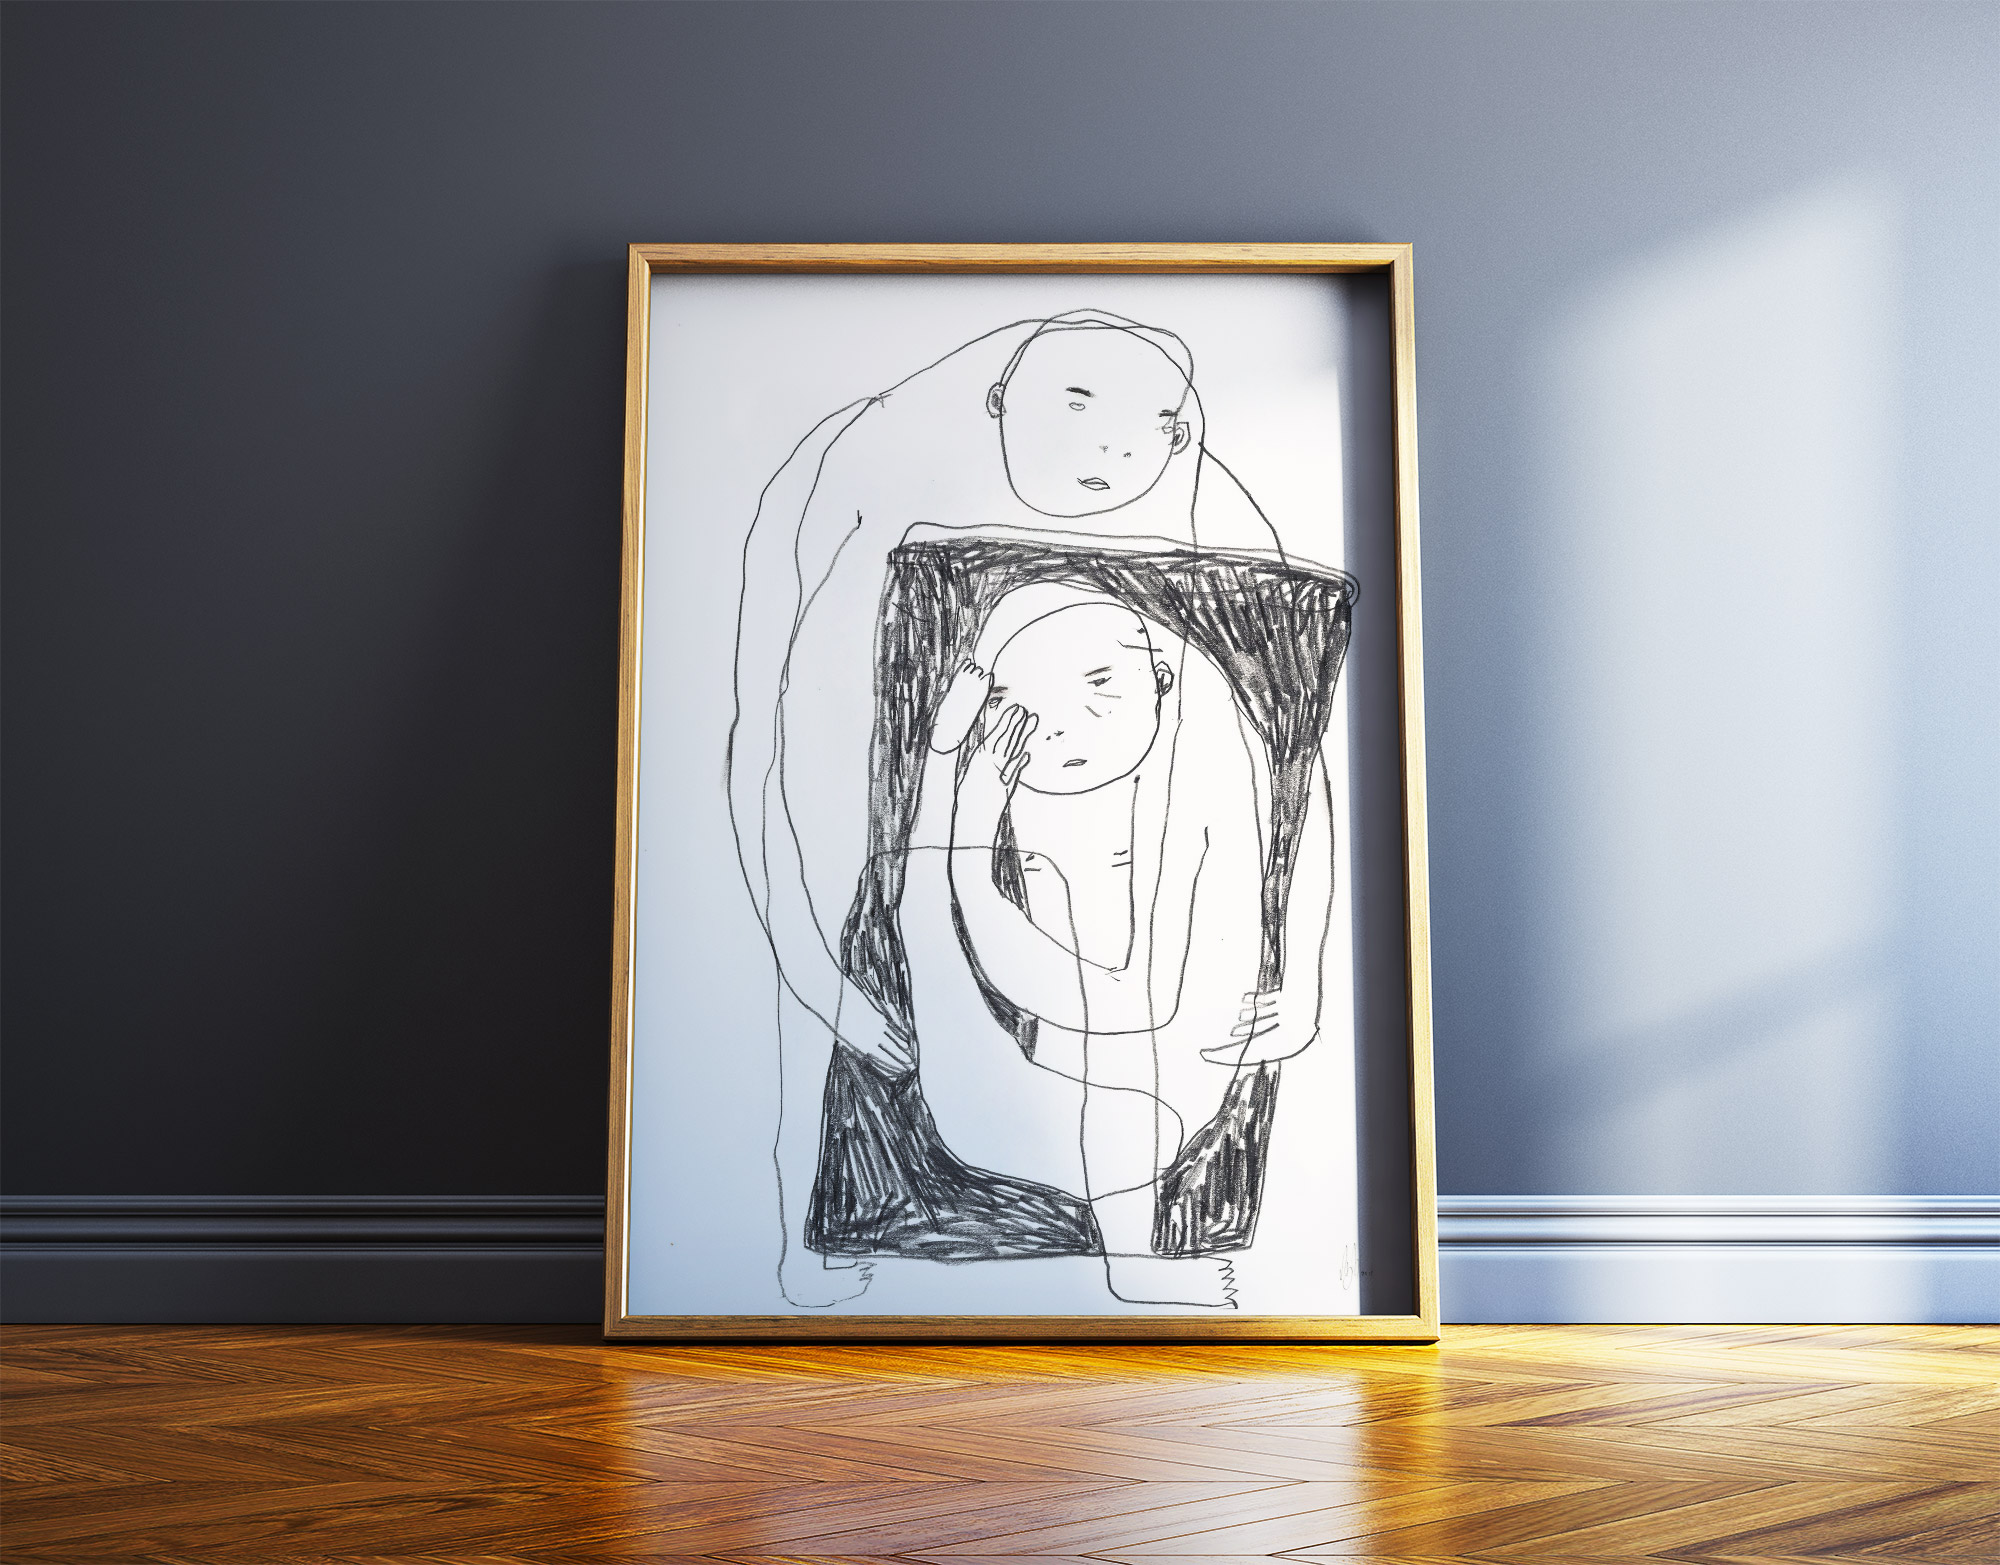 posters-prints, giclee-print, aesthetic, figurative, illustrative, minimalistic, monochrome, bodies, moods, people, grey, white, ink, paper, beautiful, contemporary-art, copenhagen, danish, decorative, design, interior, interior-design, modern, modern-art, nordic, posters, scandinavien, Buy original high quality art. Paintings, drawings, limited edition prints & posters by talented artists.